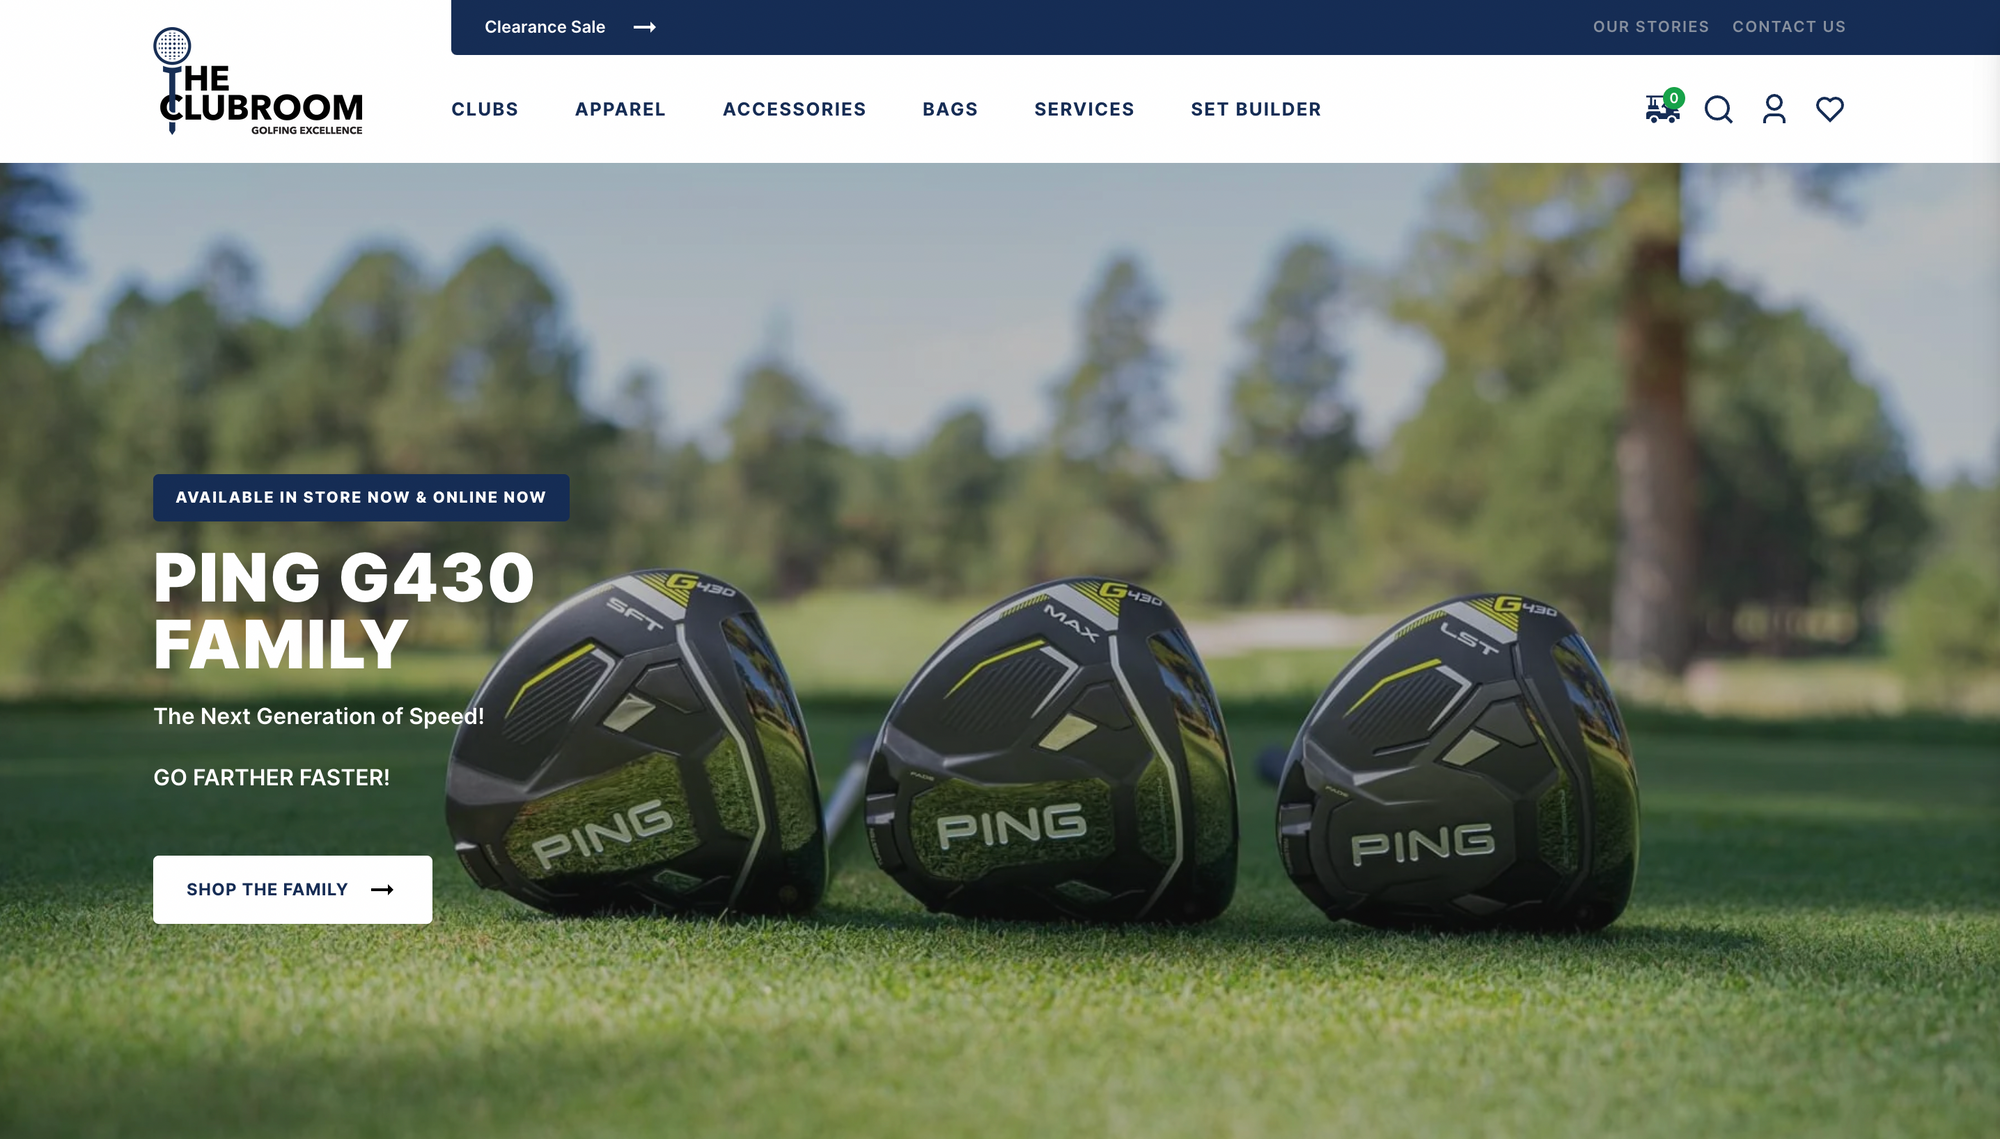 The Clubroom New and Improved Website!